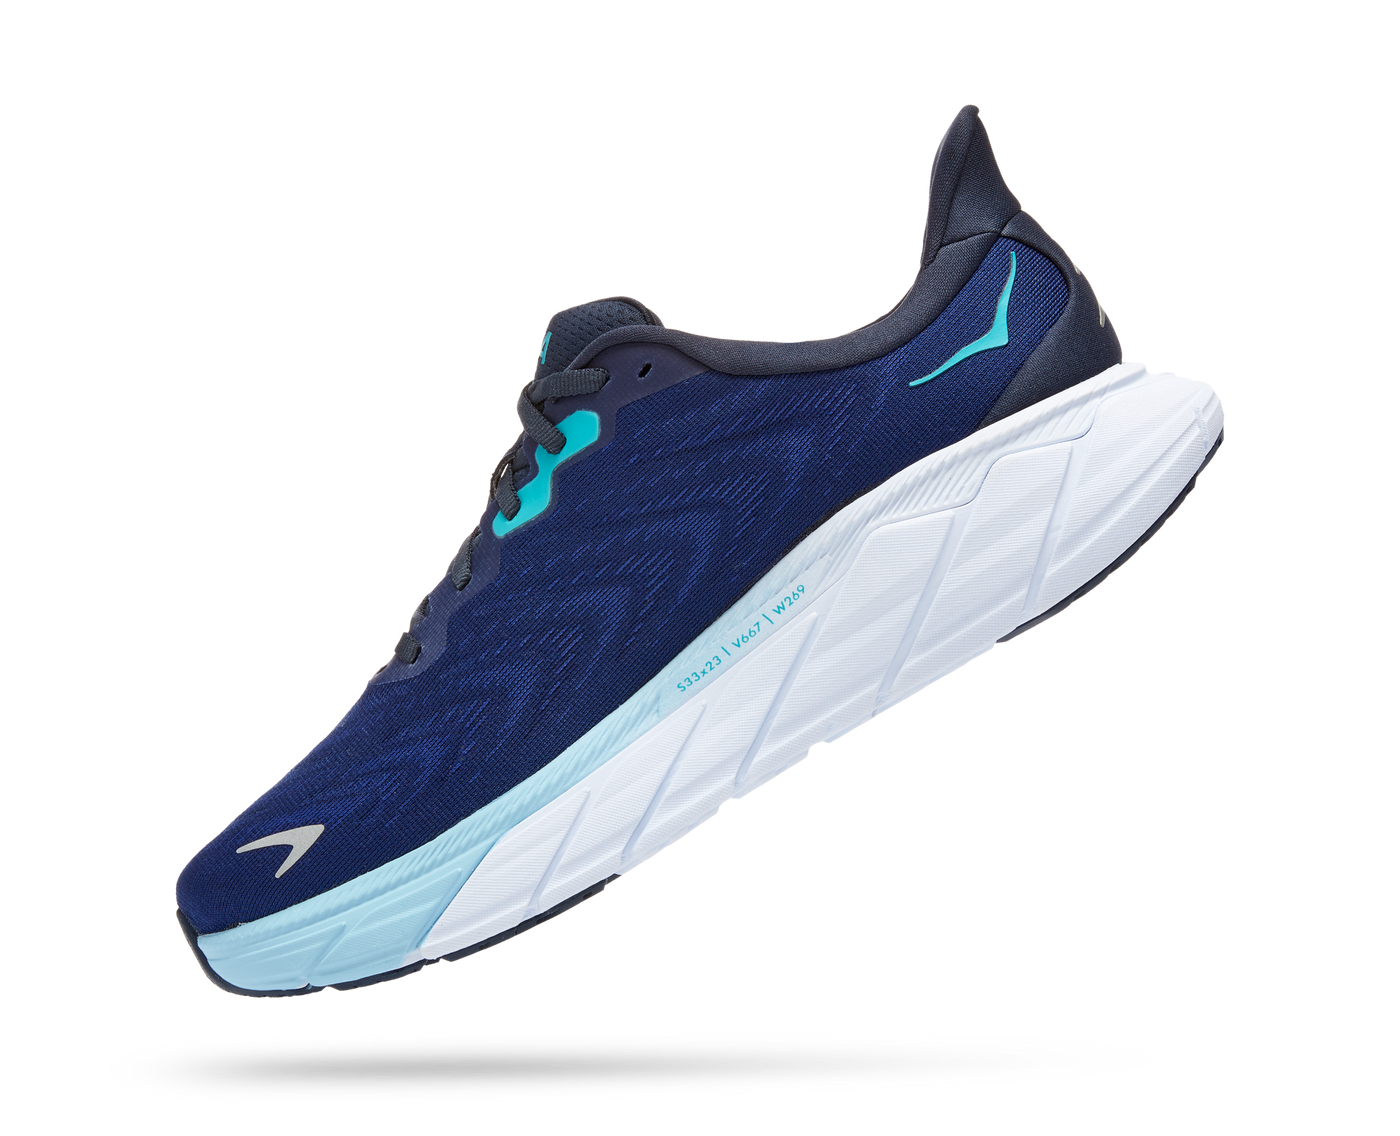 Hoka Mens Arahi 6 - Outer Space/Bellwether Blue - Stability